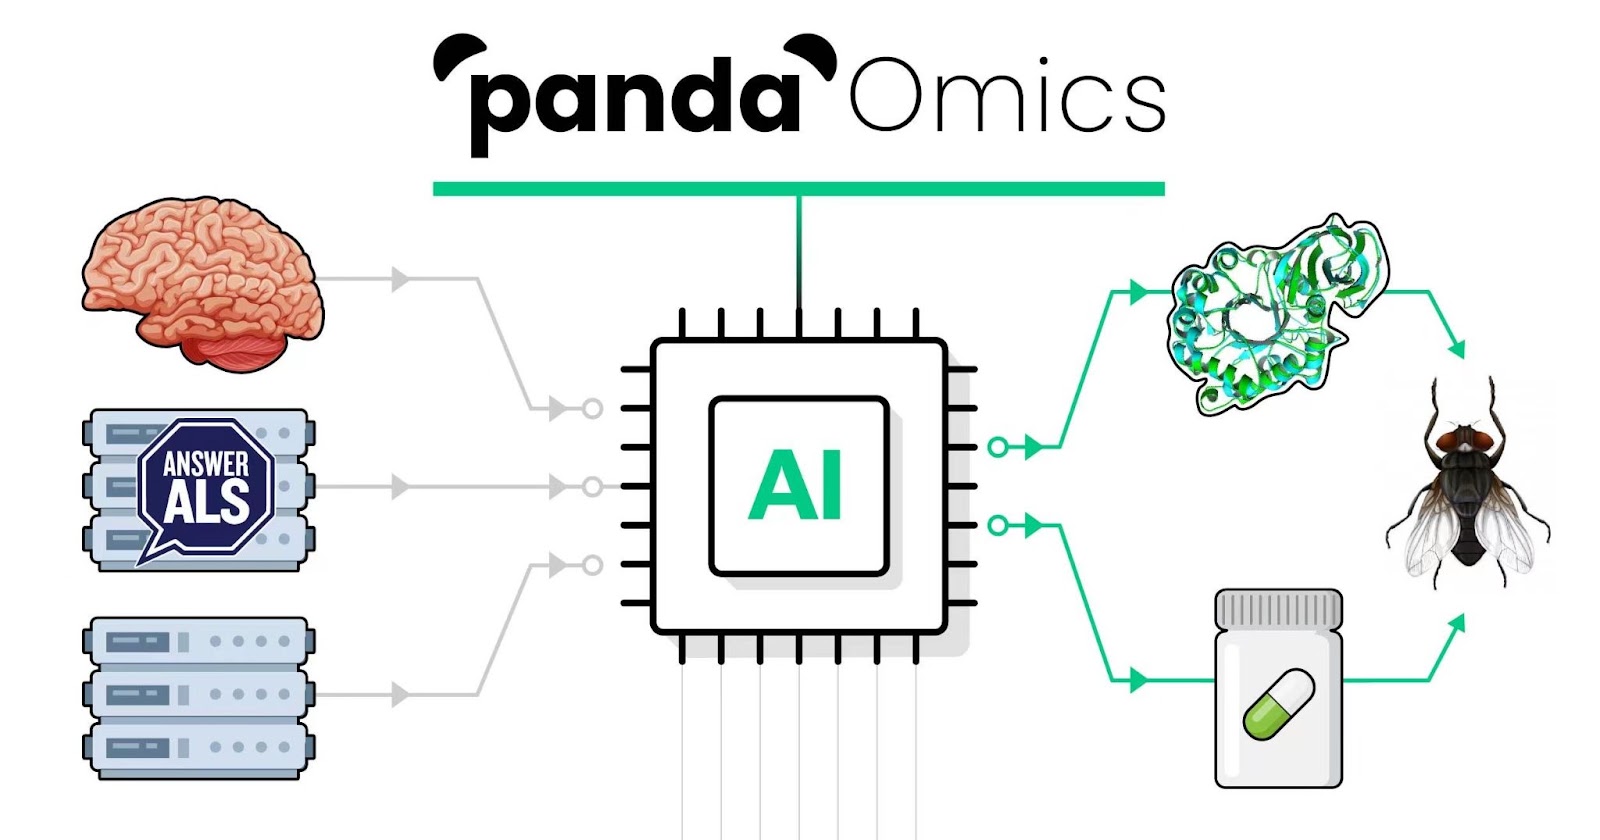 Flowchart showing the input data for the PandaOmics AI platform and the output results